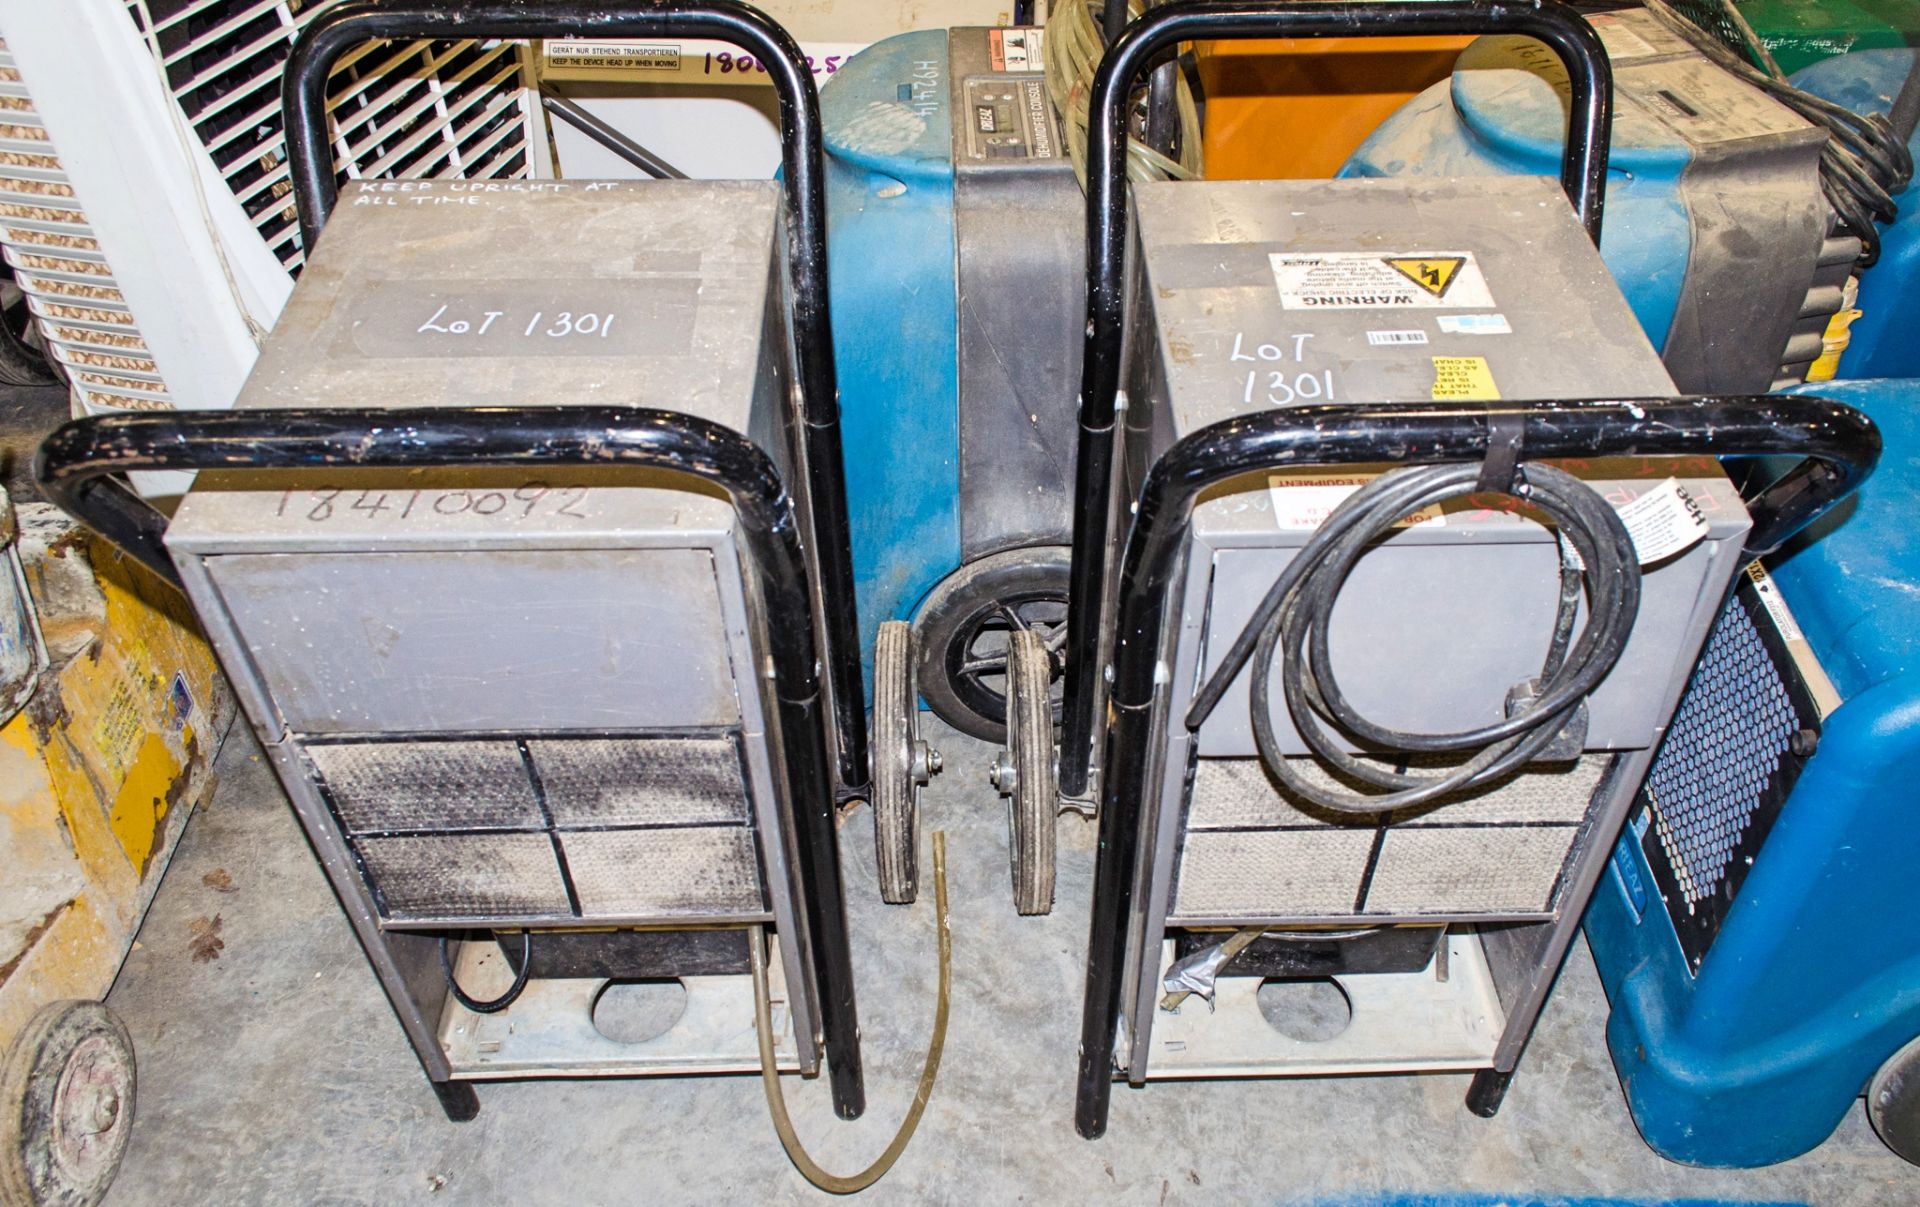 2 - Woods 240v dehumidifiers ** One for spares ** 1841-0092